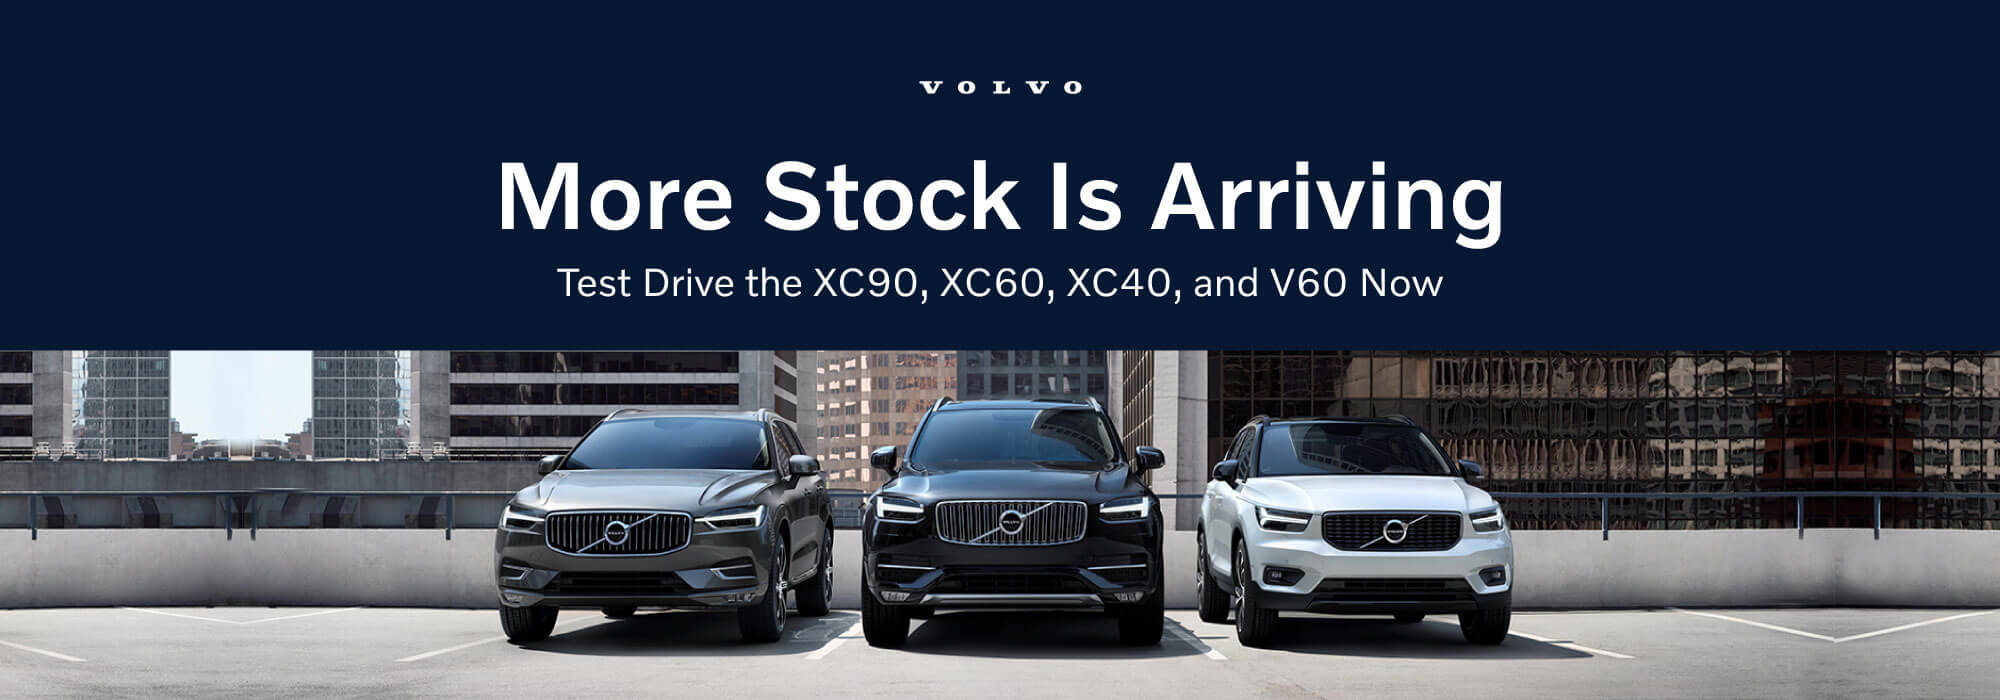 Test Drive the XC90, XC60, XC40, and V60 Now